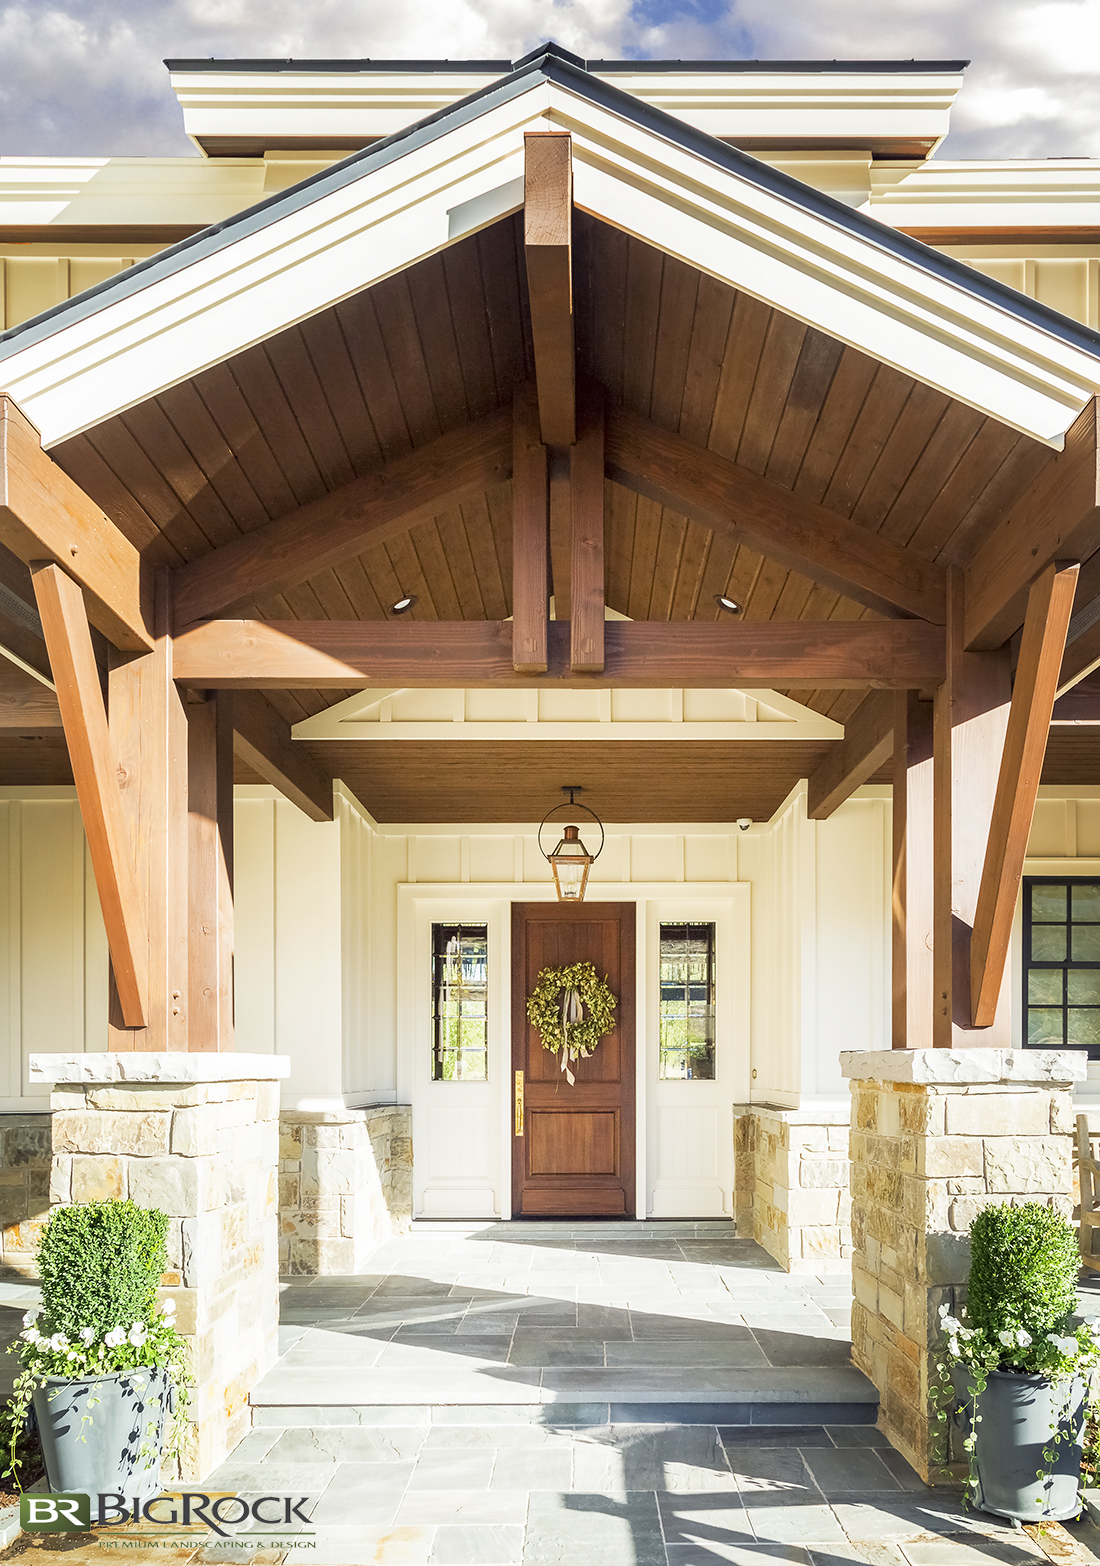 Enhance your large and spacious home entryways with landscaping shrubs and designs that complete your architecture.